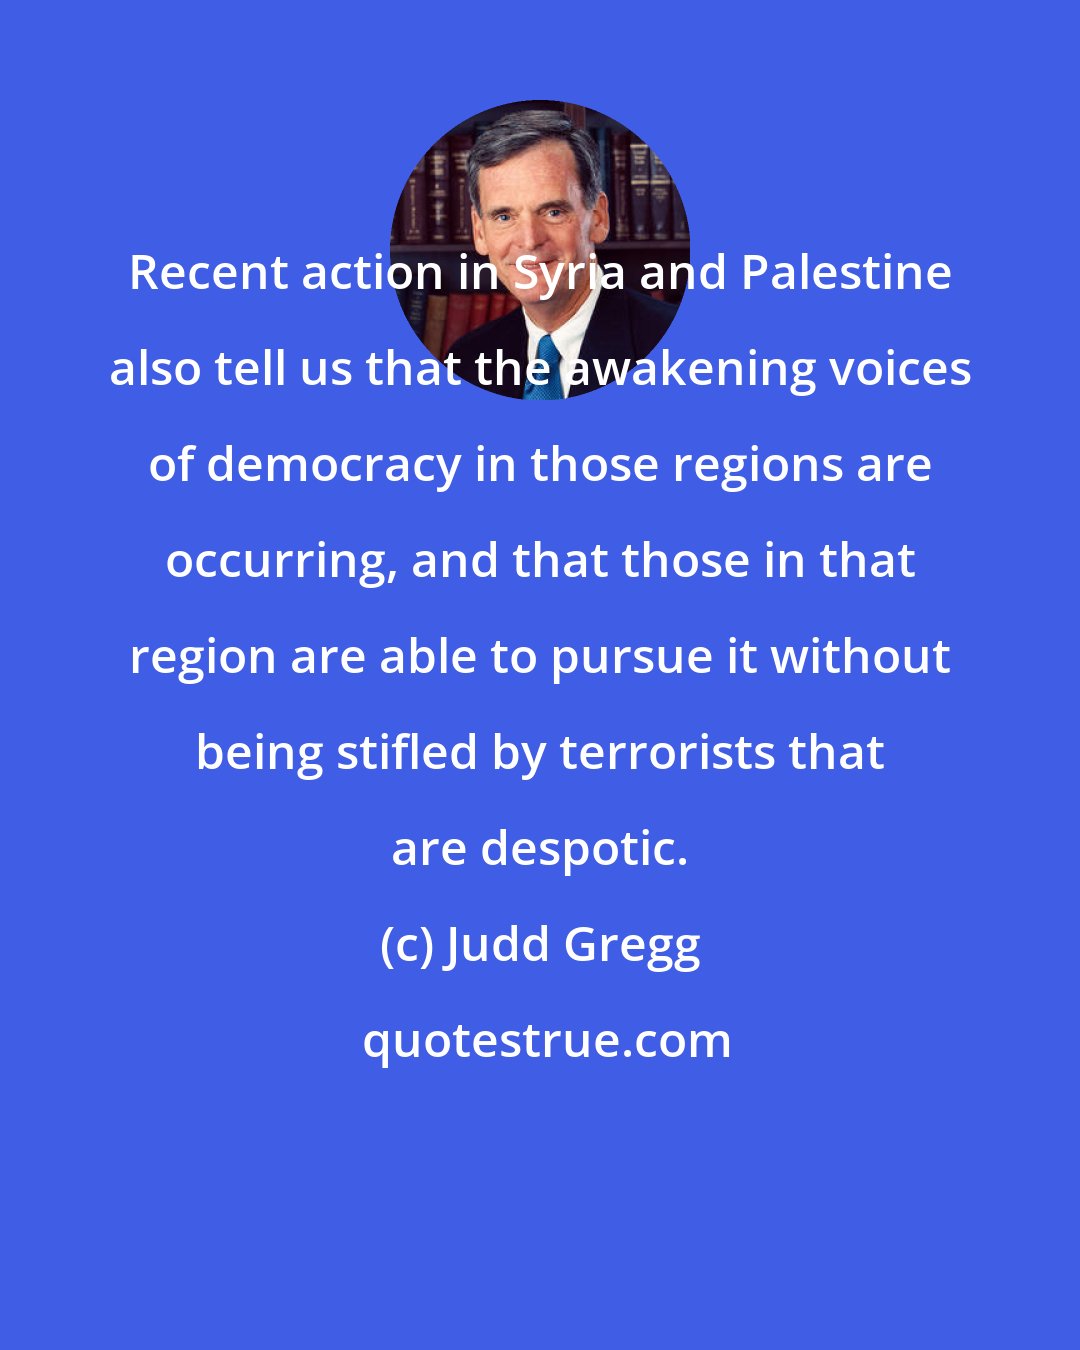 Judd Gregg: Recent action in Syria and Palestine also tell us that the awakening voices of democracy in those regions are occurring, and that those in that region are able to pursue it without being stifled by terrorists that are despotic.